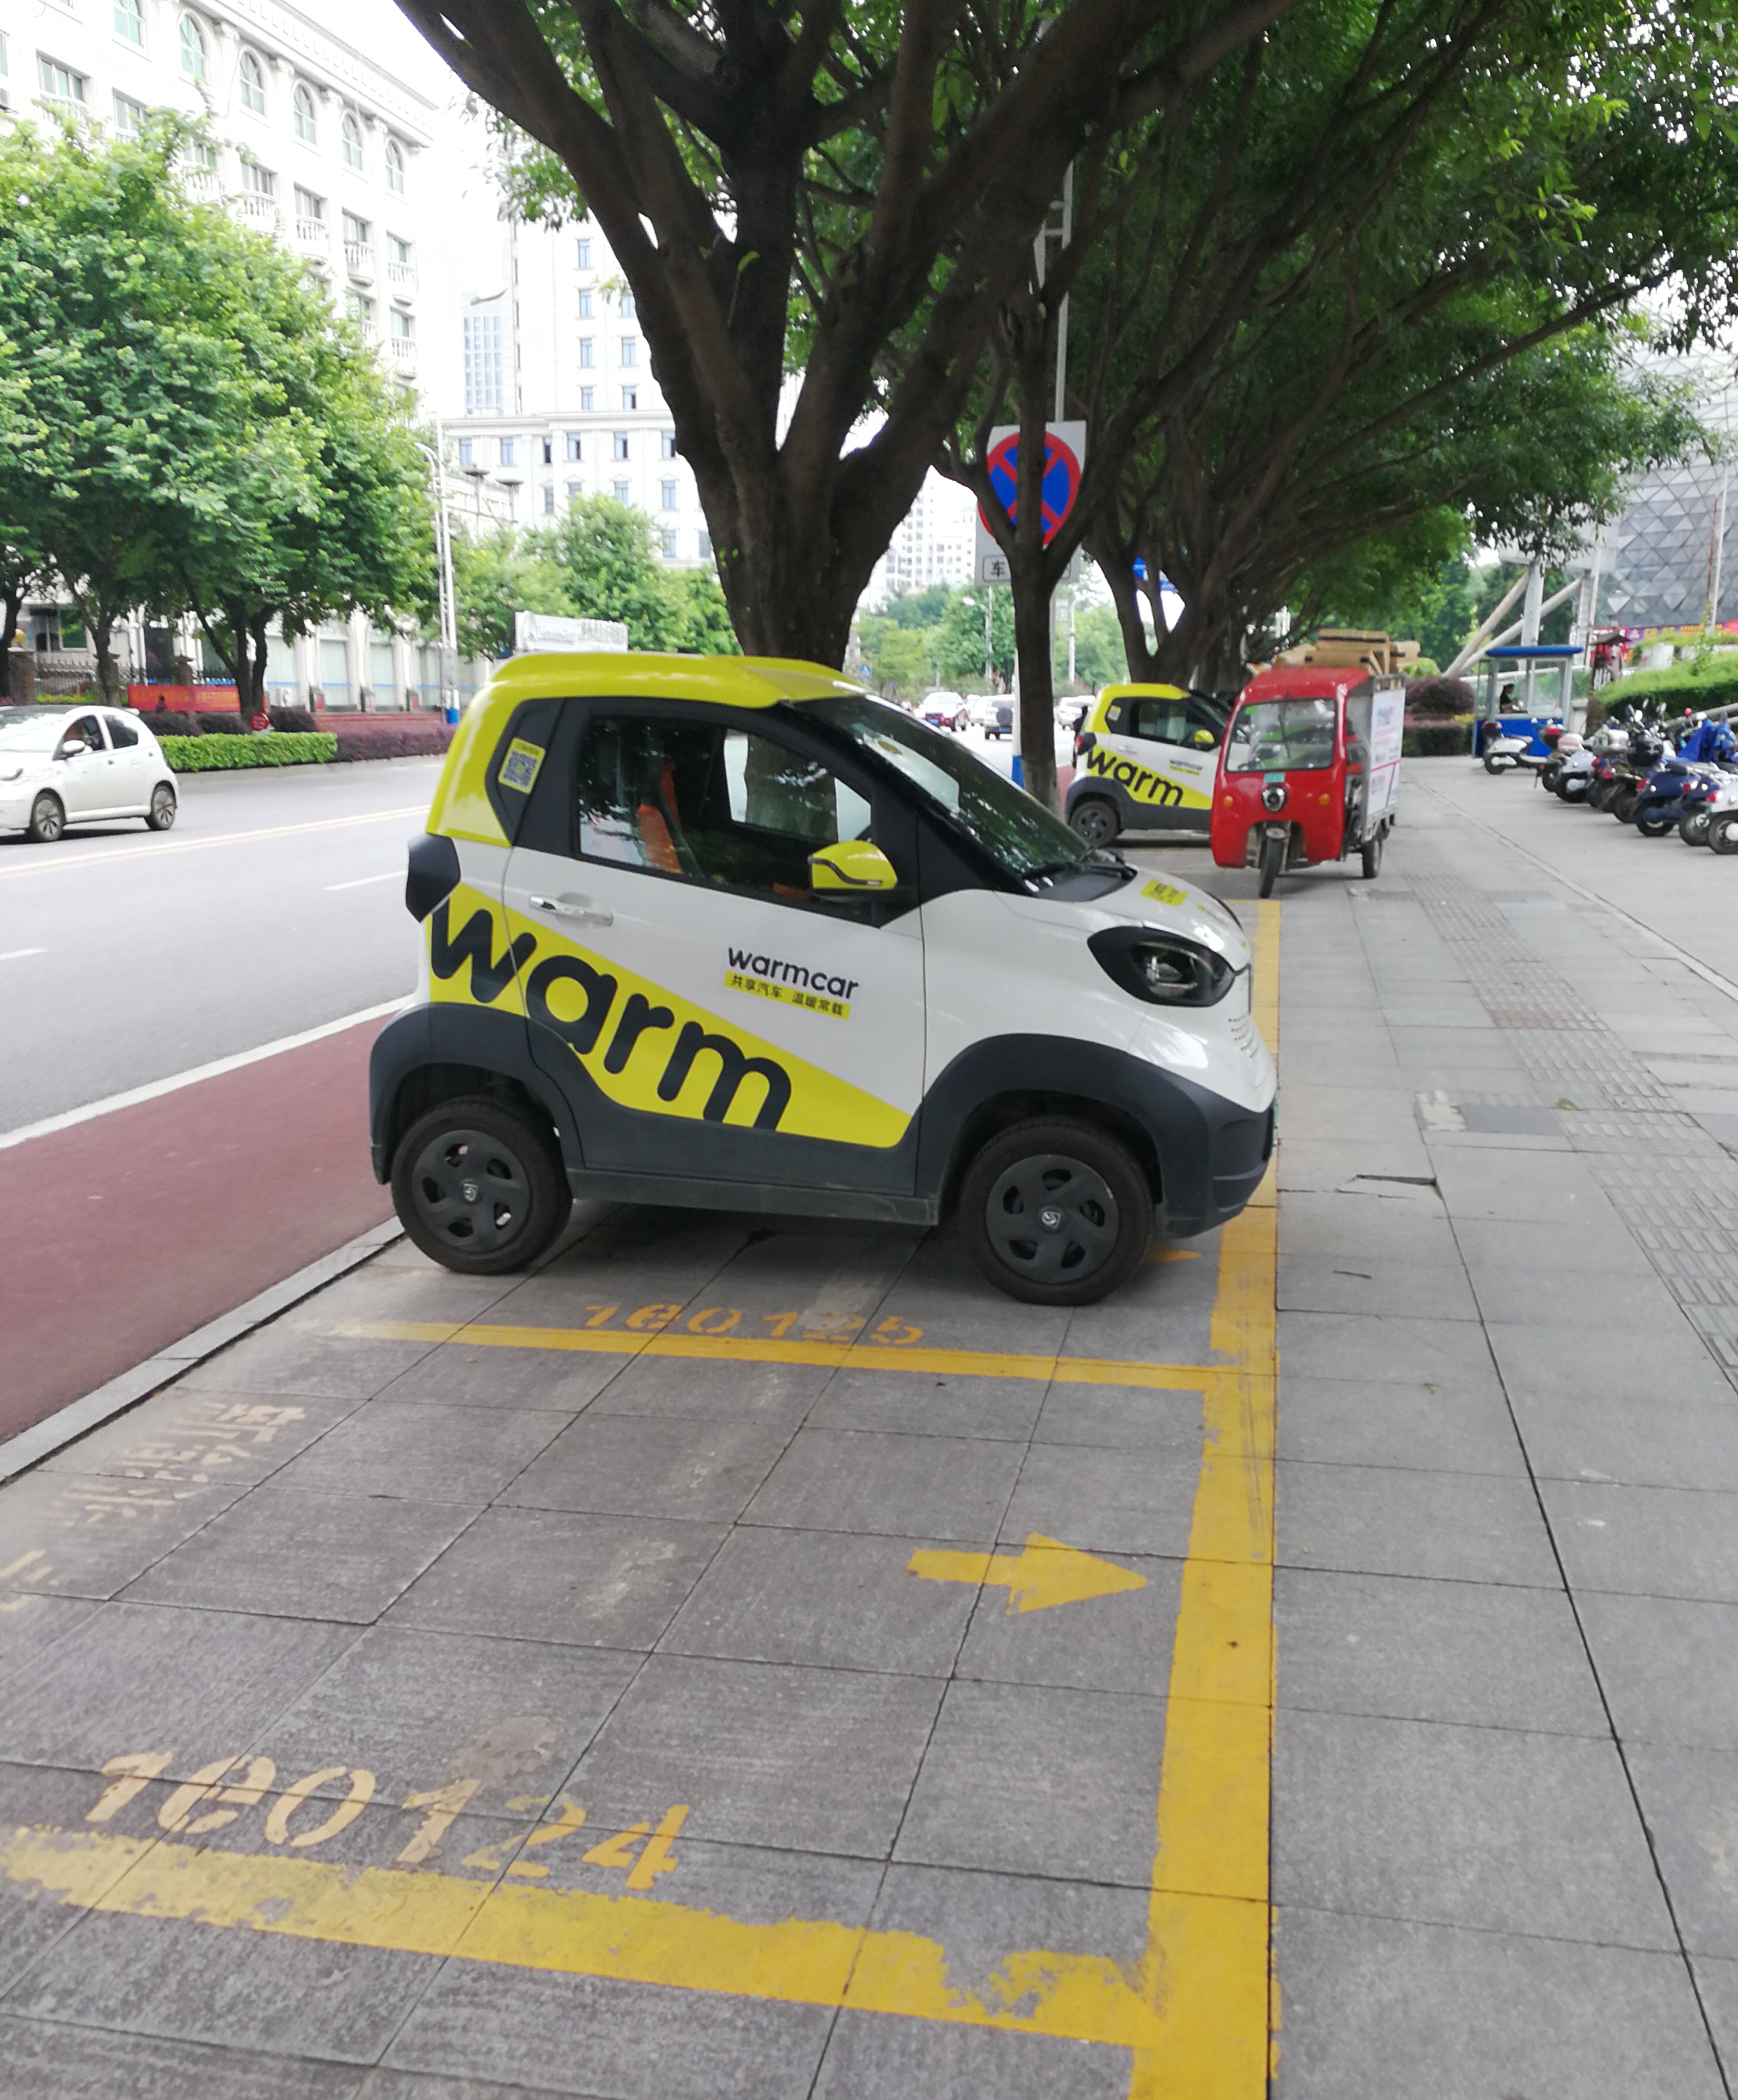 Reserved parking space (yellow box) for EVs in Liuzhou. Photo by Hui He.